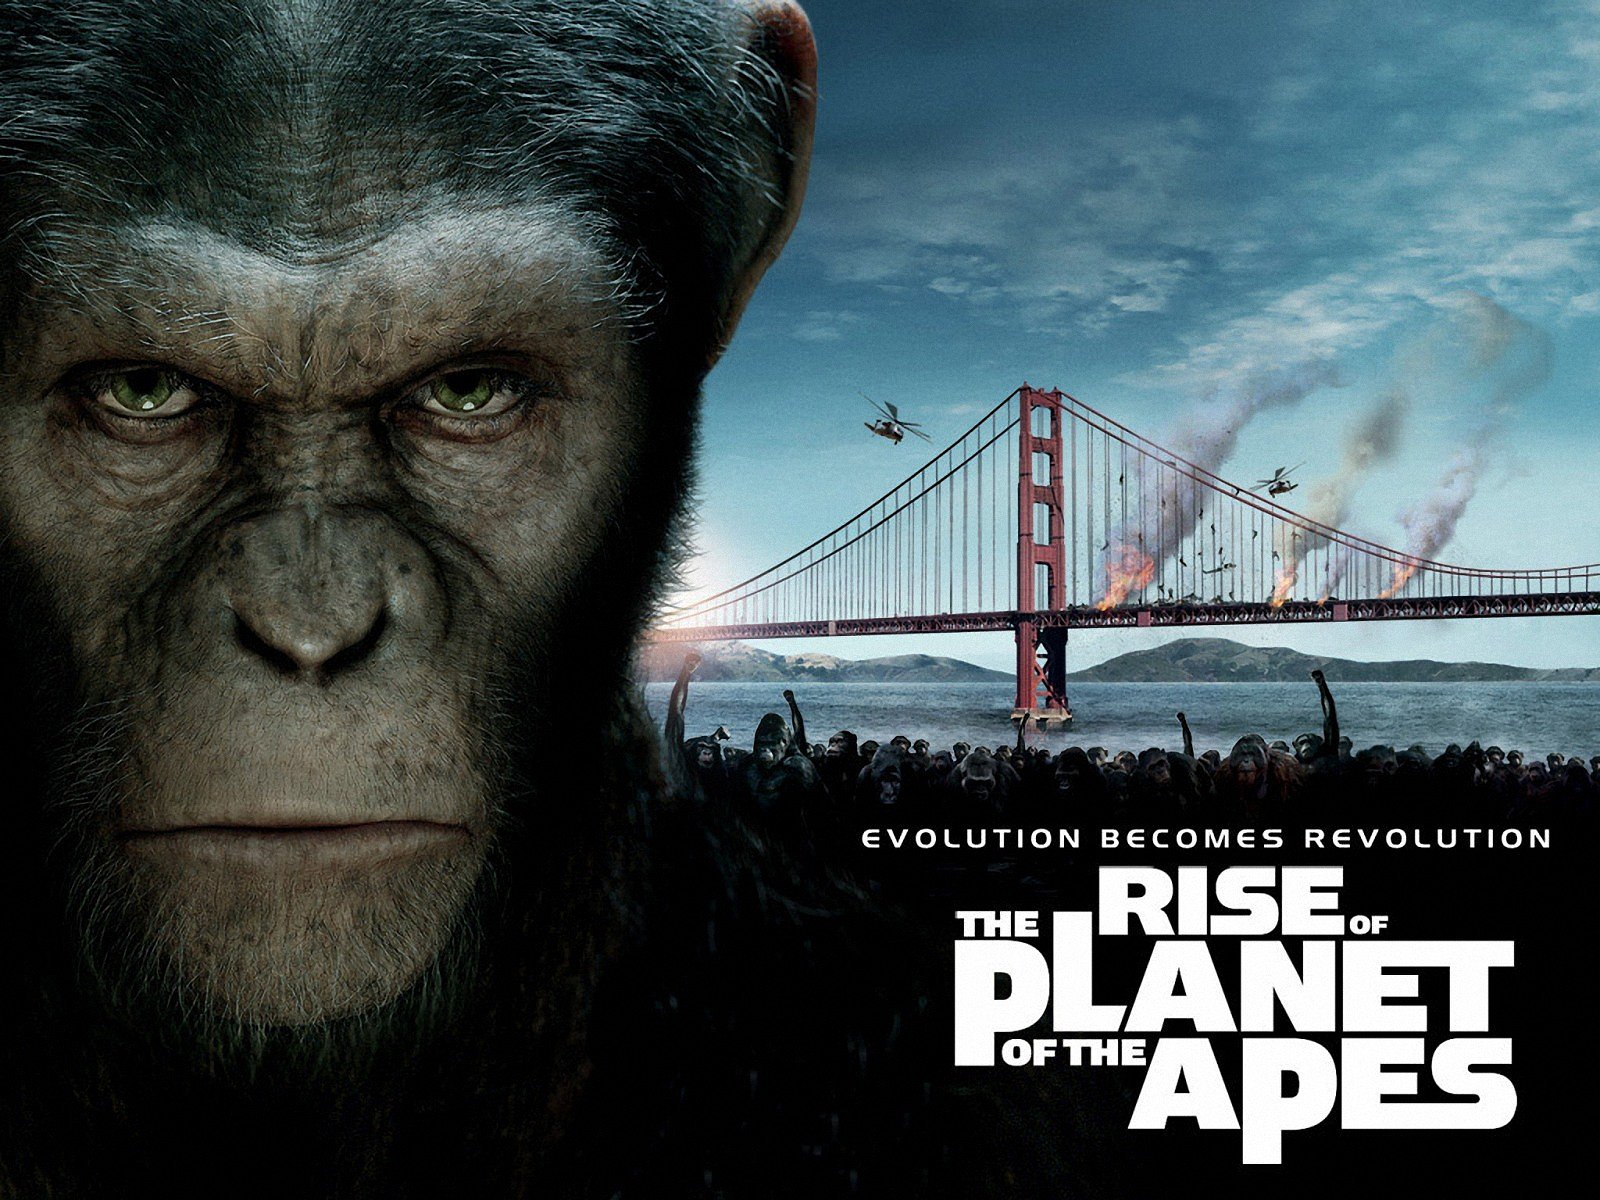 Rise of the Planet of the Apes Google image from http://www.dvd-ppt-slideshow.com/blog/wp-content/uploads/2011/08/rise-of-planet-of-the-apes-4.jpg